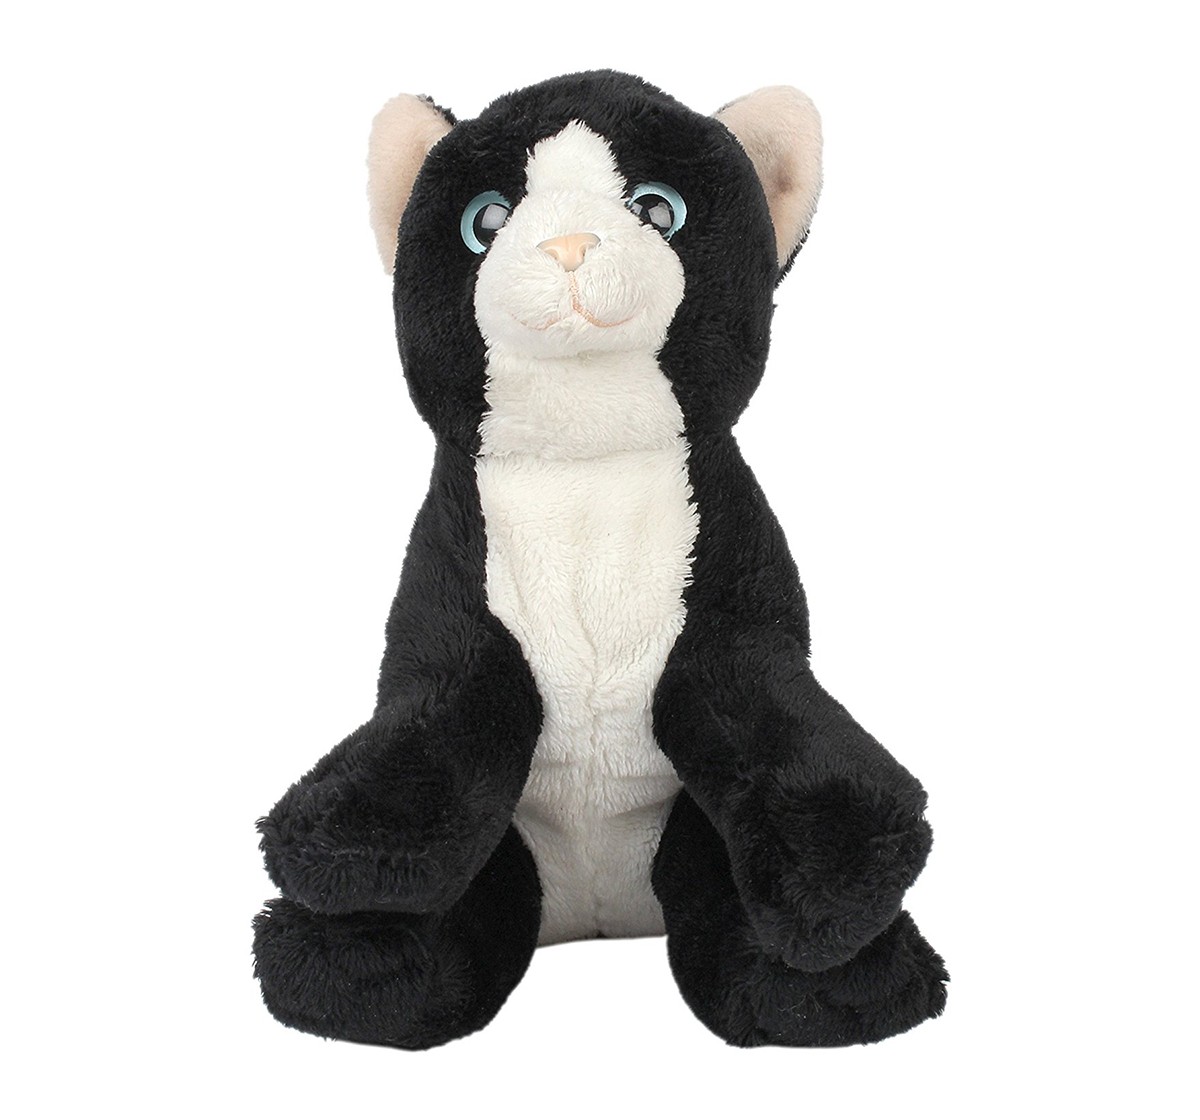  Hamleys Floppy  Black And White Cat Pet Animal With Beans Plush Soft Toy For Kids, age 2Y+ - 17 Cm (Black)